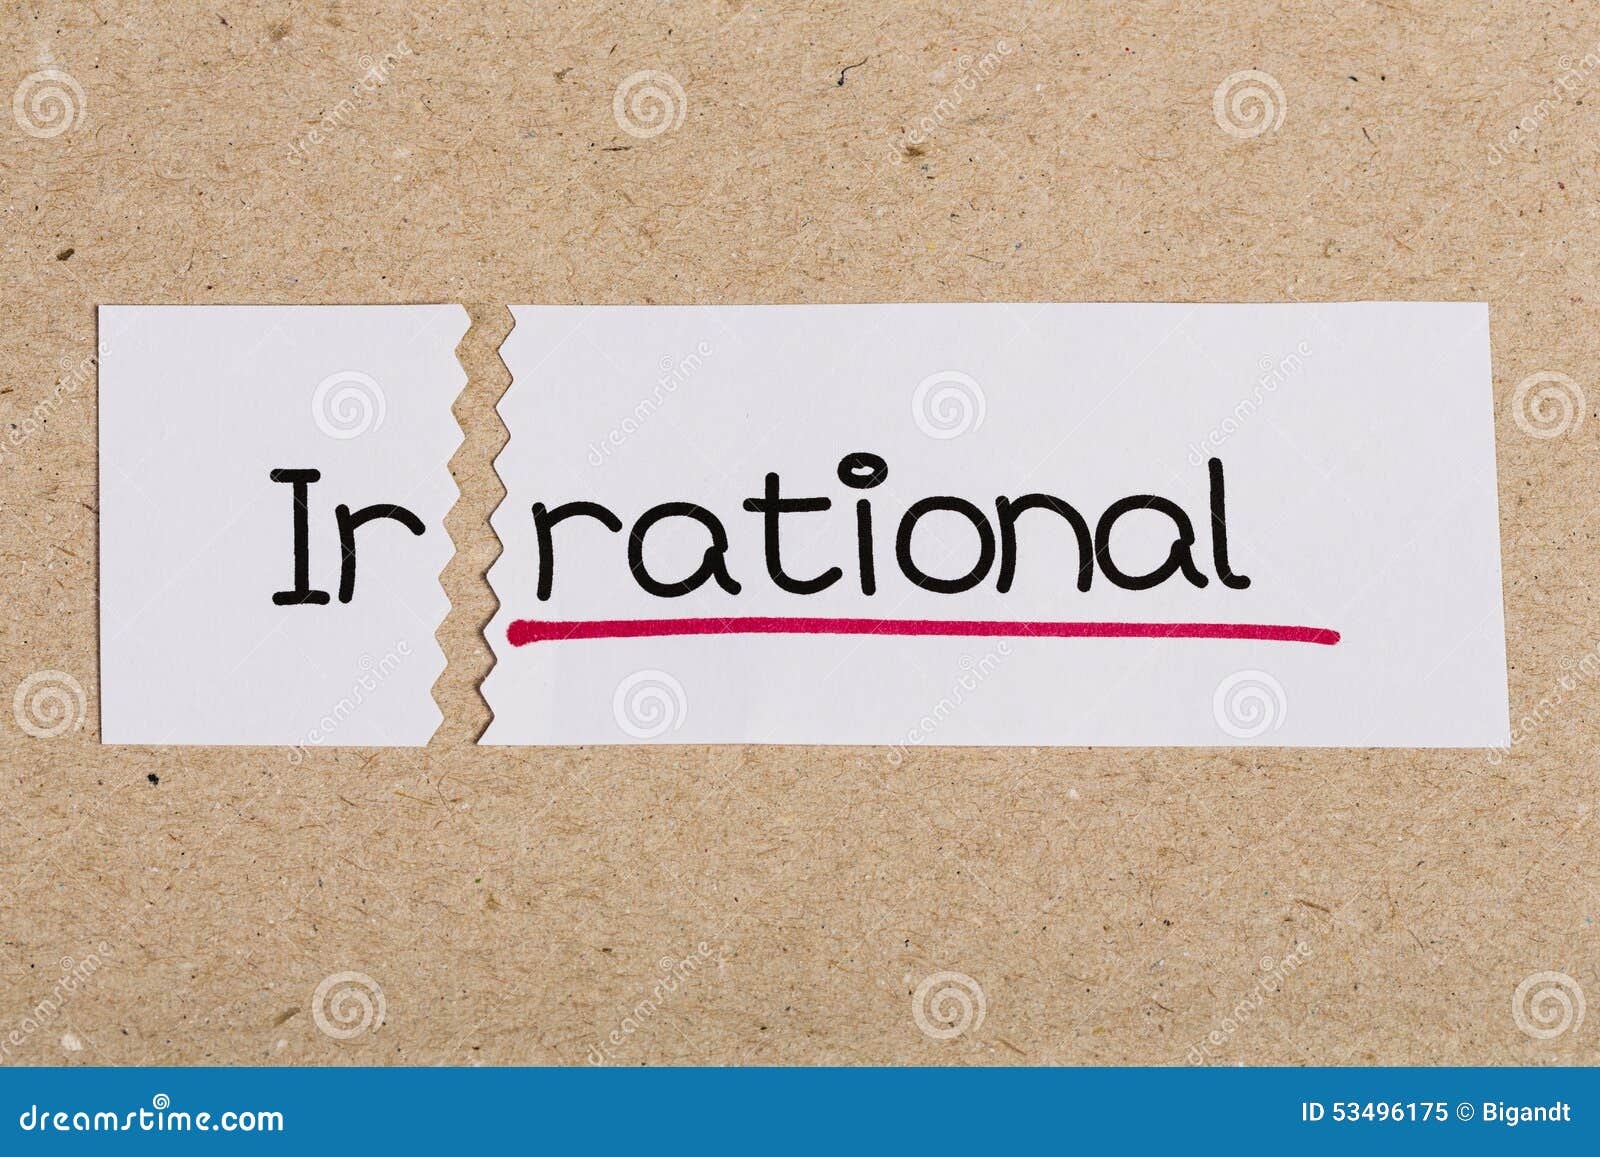 sign with word irrational turned into rational